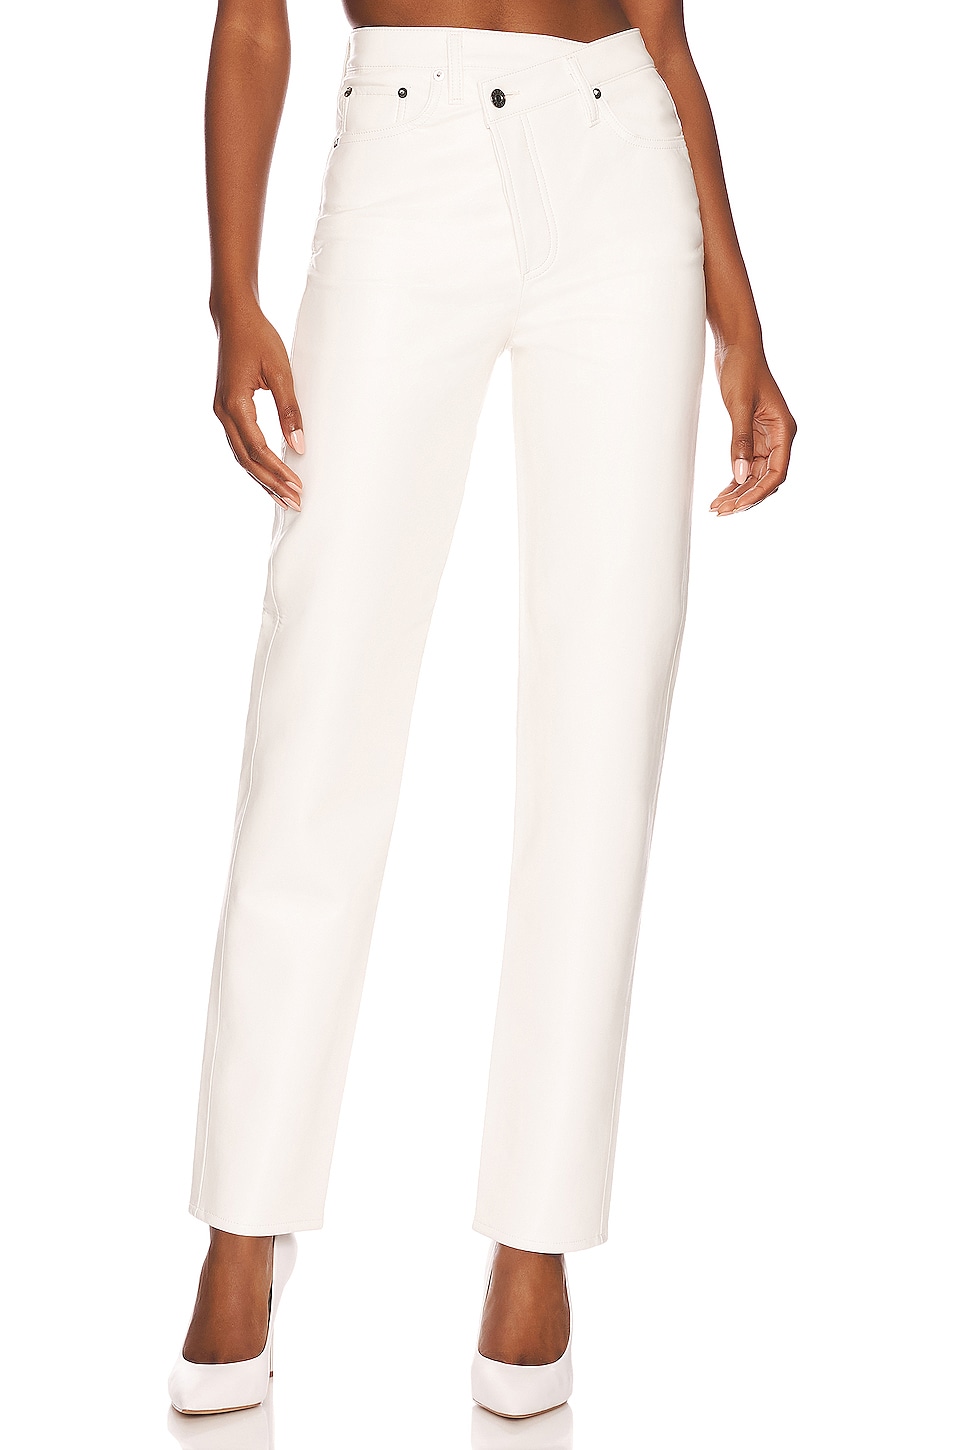 White Criss Cross Leather Pants by AGOLDE on Sale